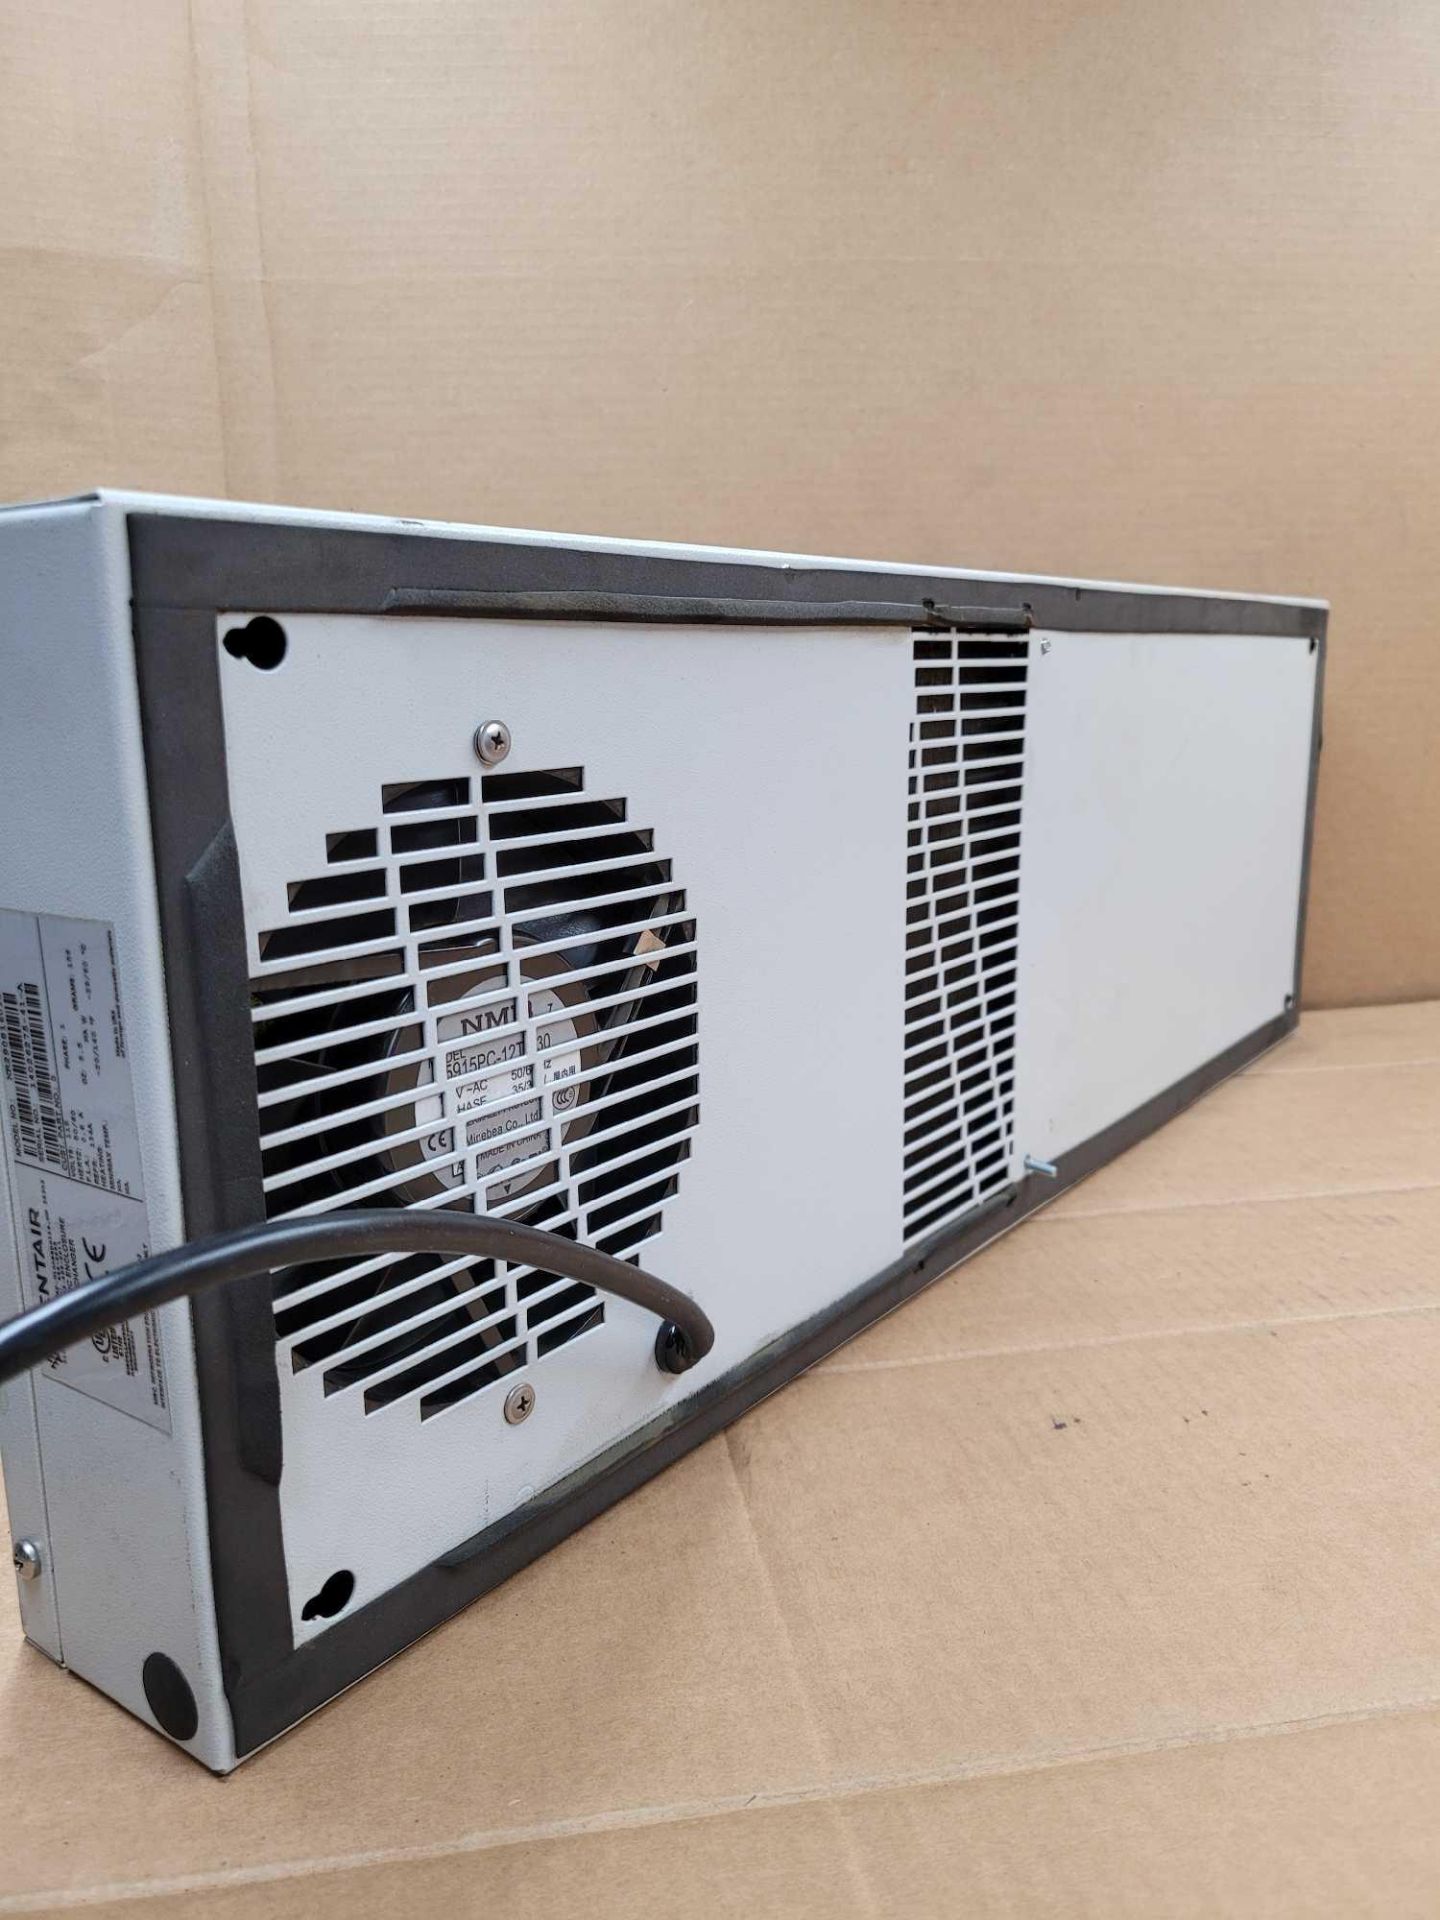 PENTAIR XR290816012 / Electronic Enclosure Heat Exchanger  /  Lot Weight: 19.8 lbs - Image 4 of 5